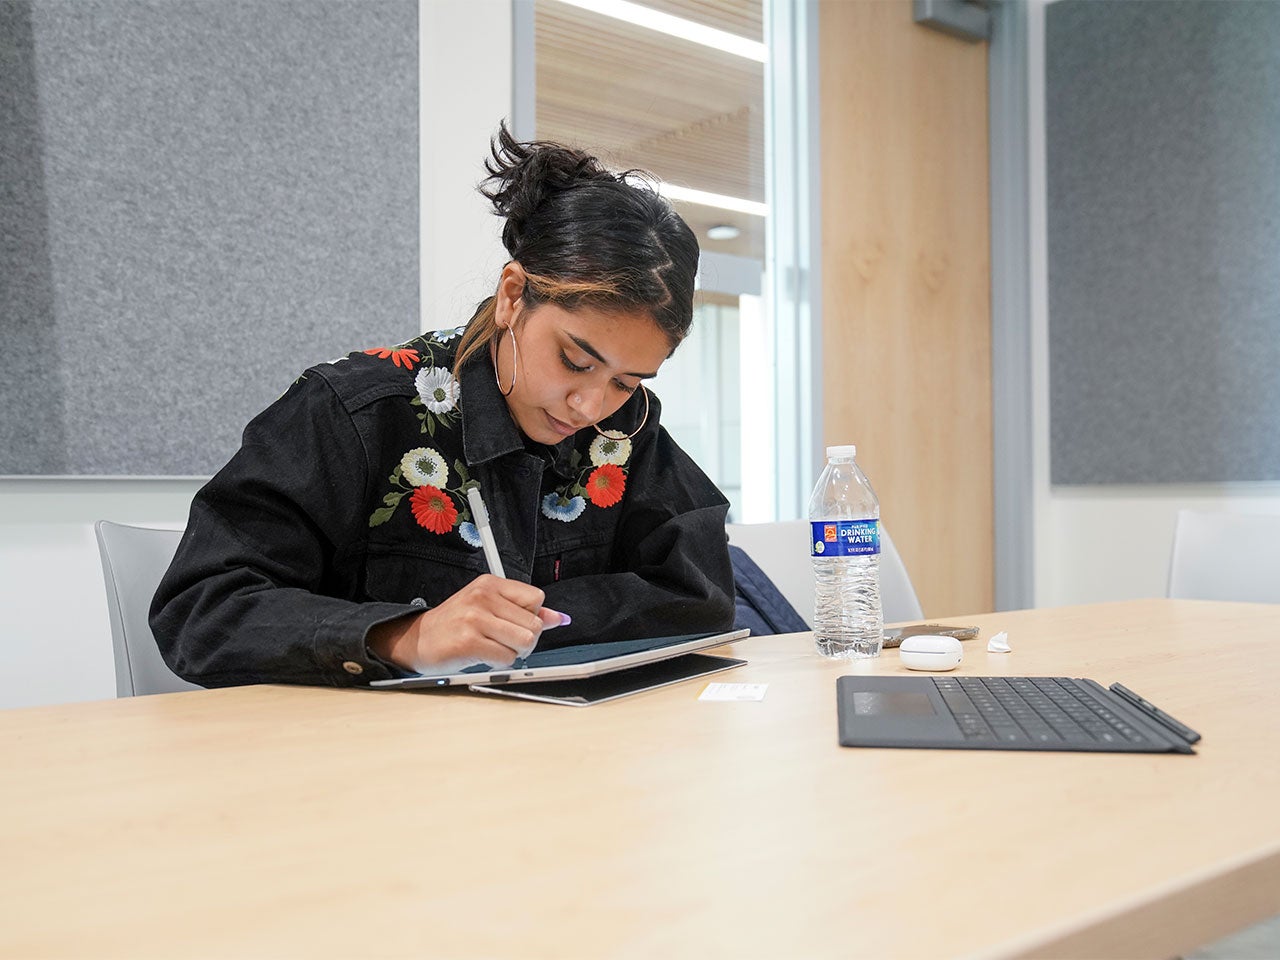 A ˽̳ Davis student, wearing hoop earrings and a black denim jacket with floral embroidery, takes notes on a tablet in ˽̳ Davis' Center for Educational Effectiveness.